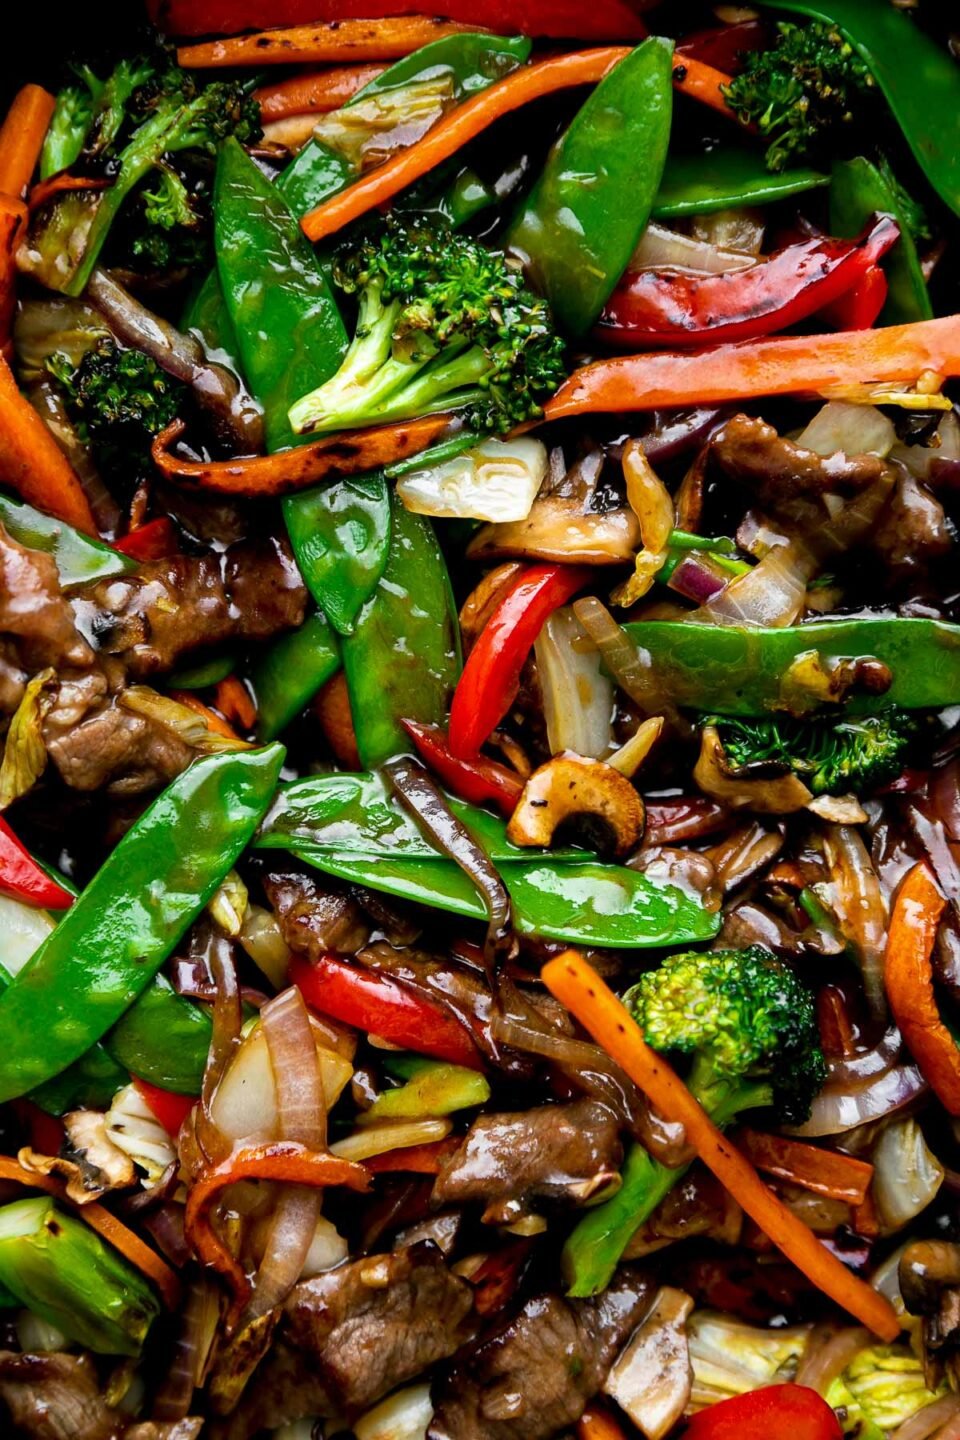 A close up macro shot of finished beef and vegetable stir fry. The beef and vegetables are glossy with a coating of homemade stir fry sauce.